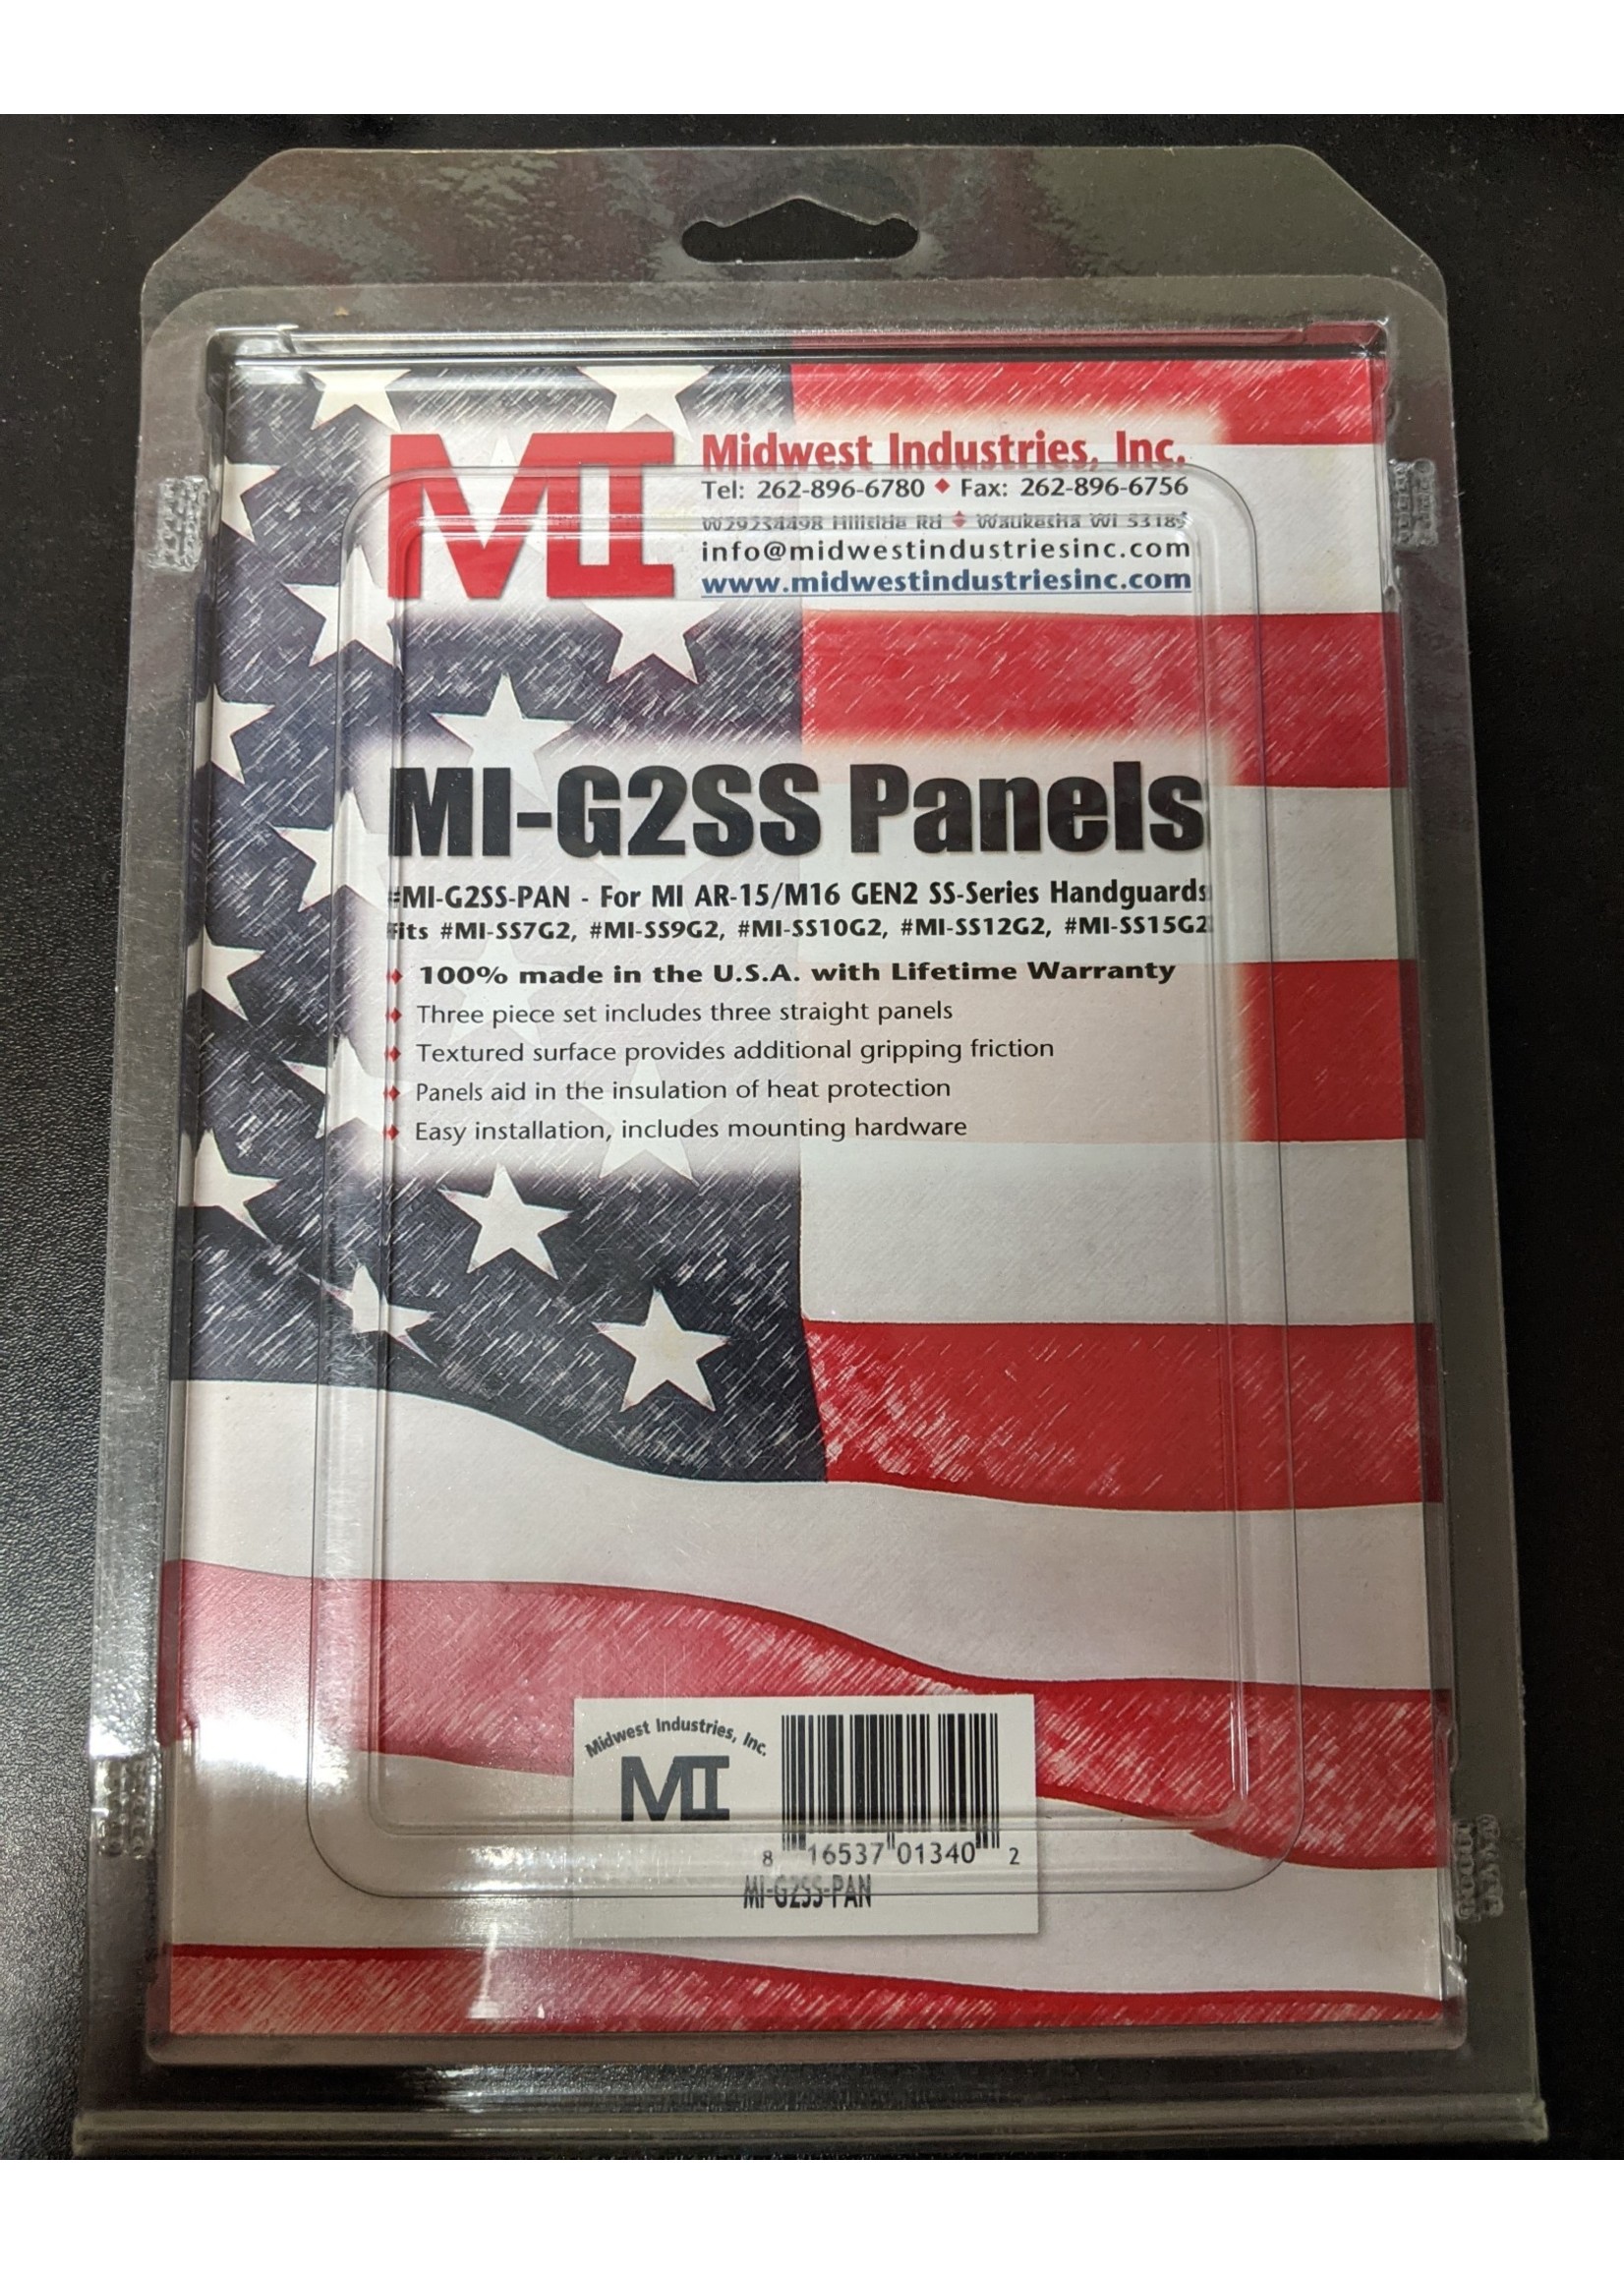 MIDWEST INDUSTRIES MIDWEST MI-G2SS PANELS